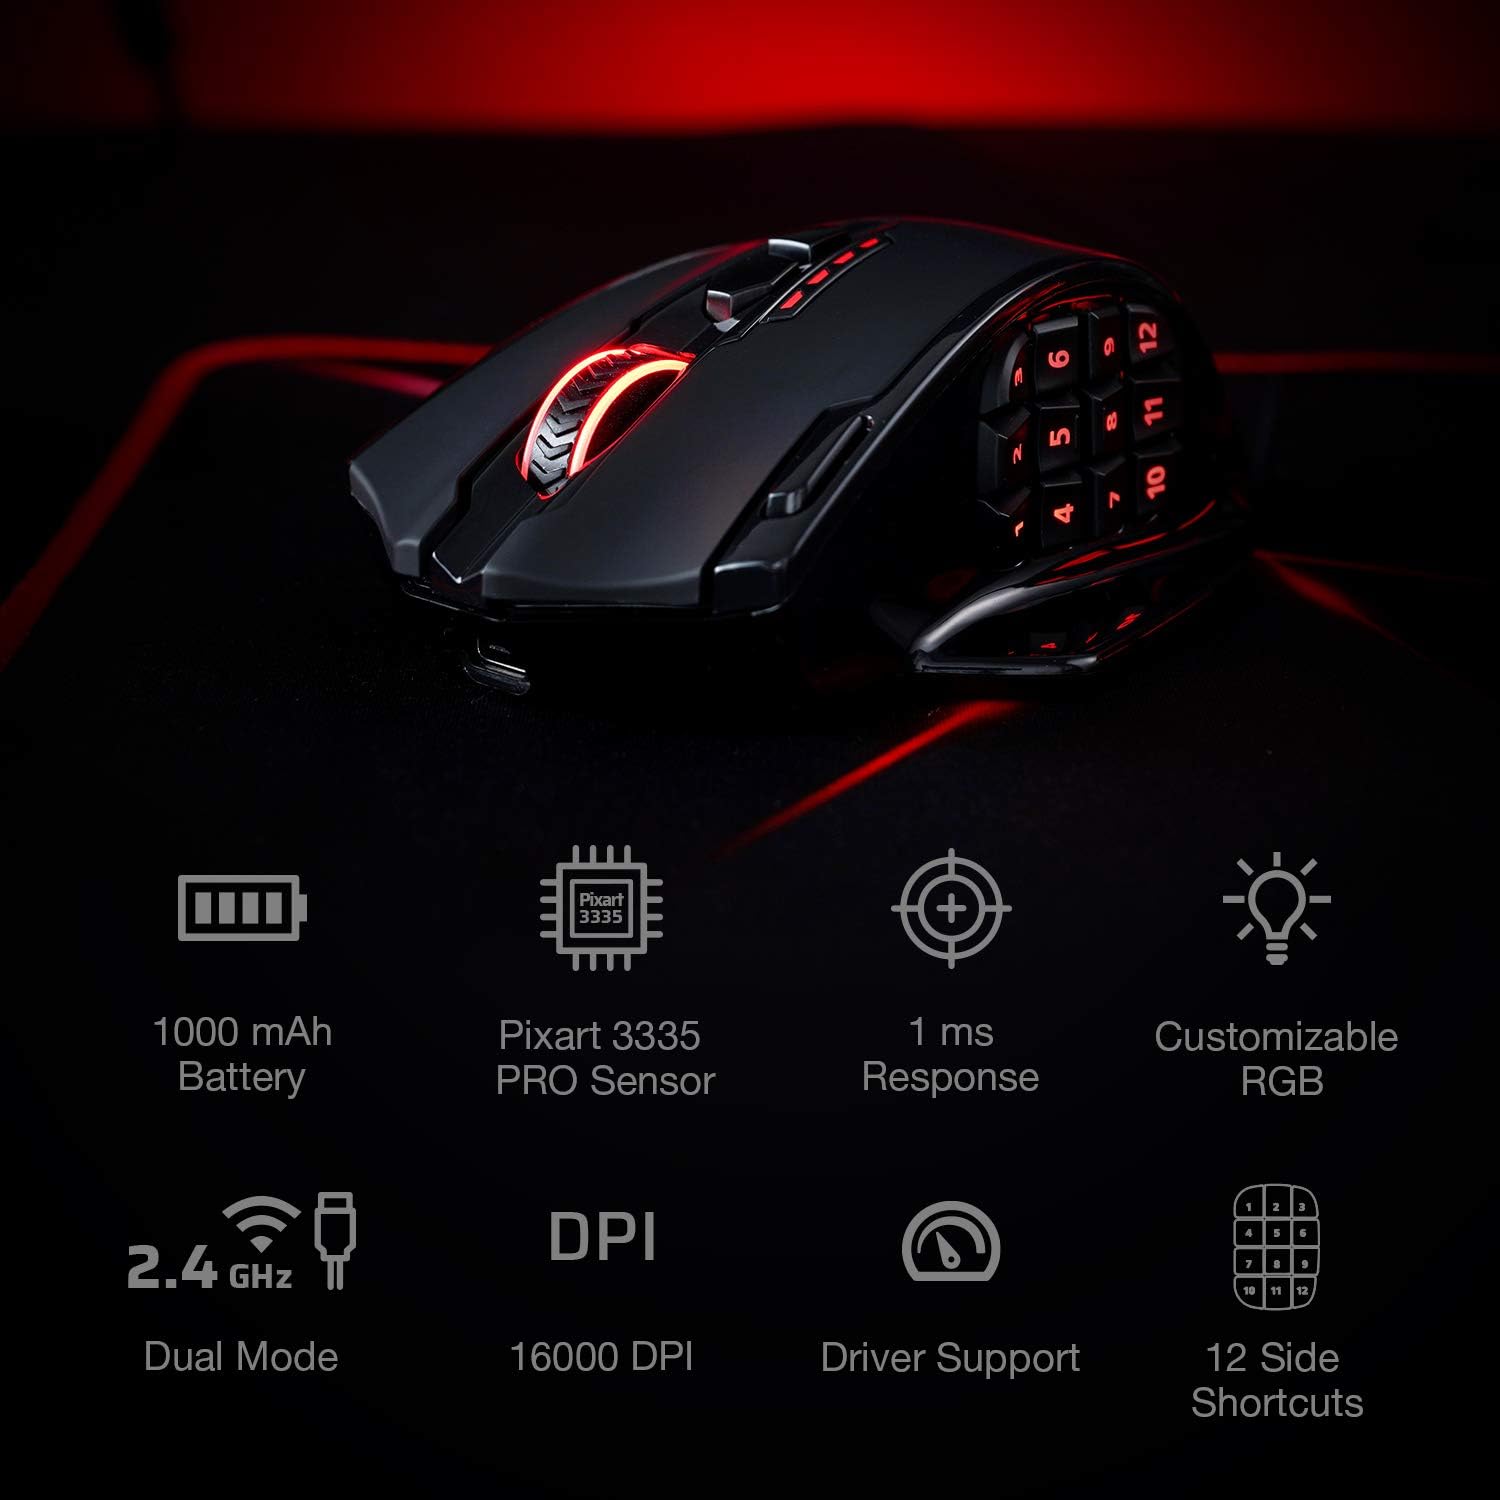 Redragon M913 Impact Elite Wireless Gaming Mouse, 16000 DPI Wired/Wireless RGB Mouse with 20 Programmable Buttons, 45 Hours Battery Operated and Optical Pro Sensor, 12 Side Buttons MMO Mouse